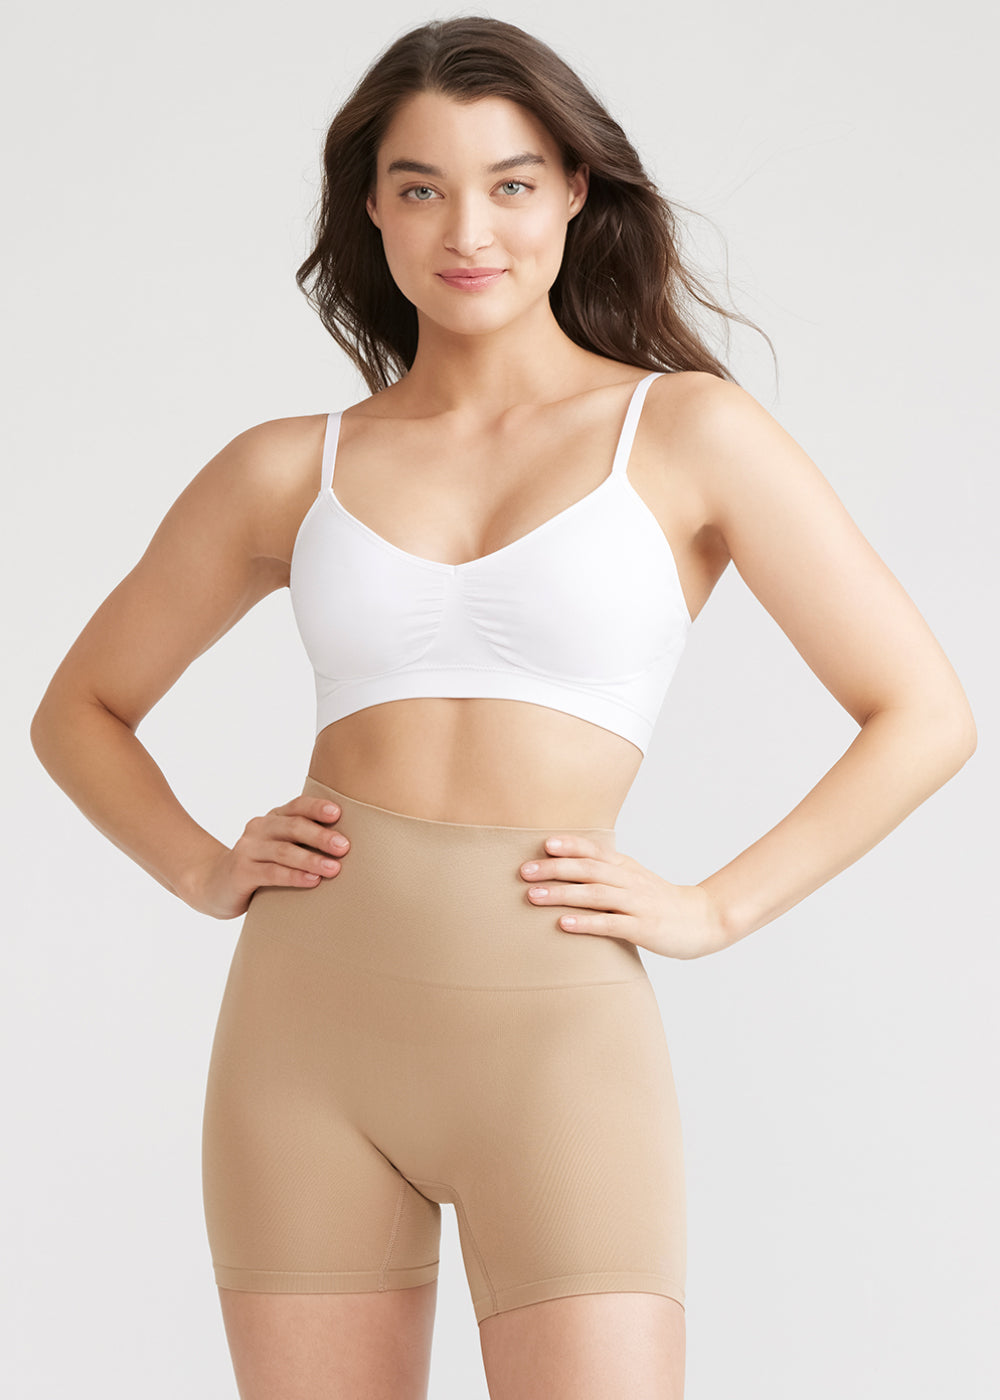 mona shaping short - seamless in Almond and  v-neck bralette - seamless in White worn by a woman facing forward with hands on waist Yummie